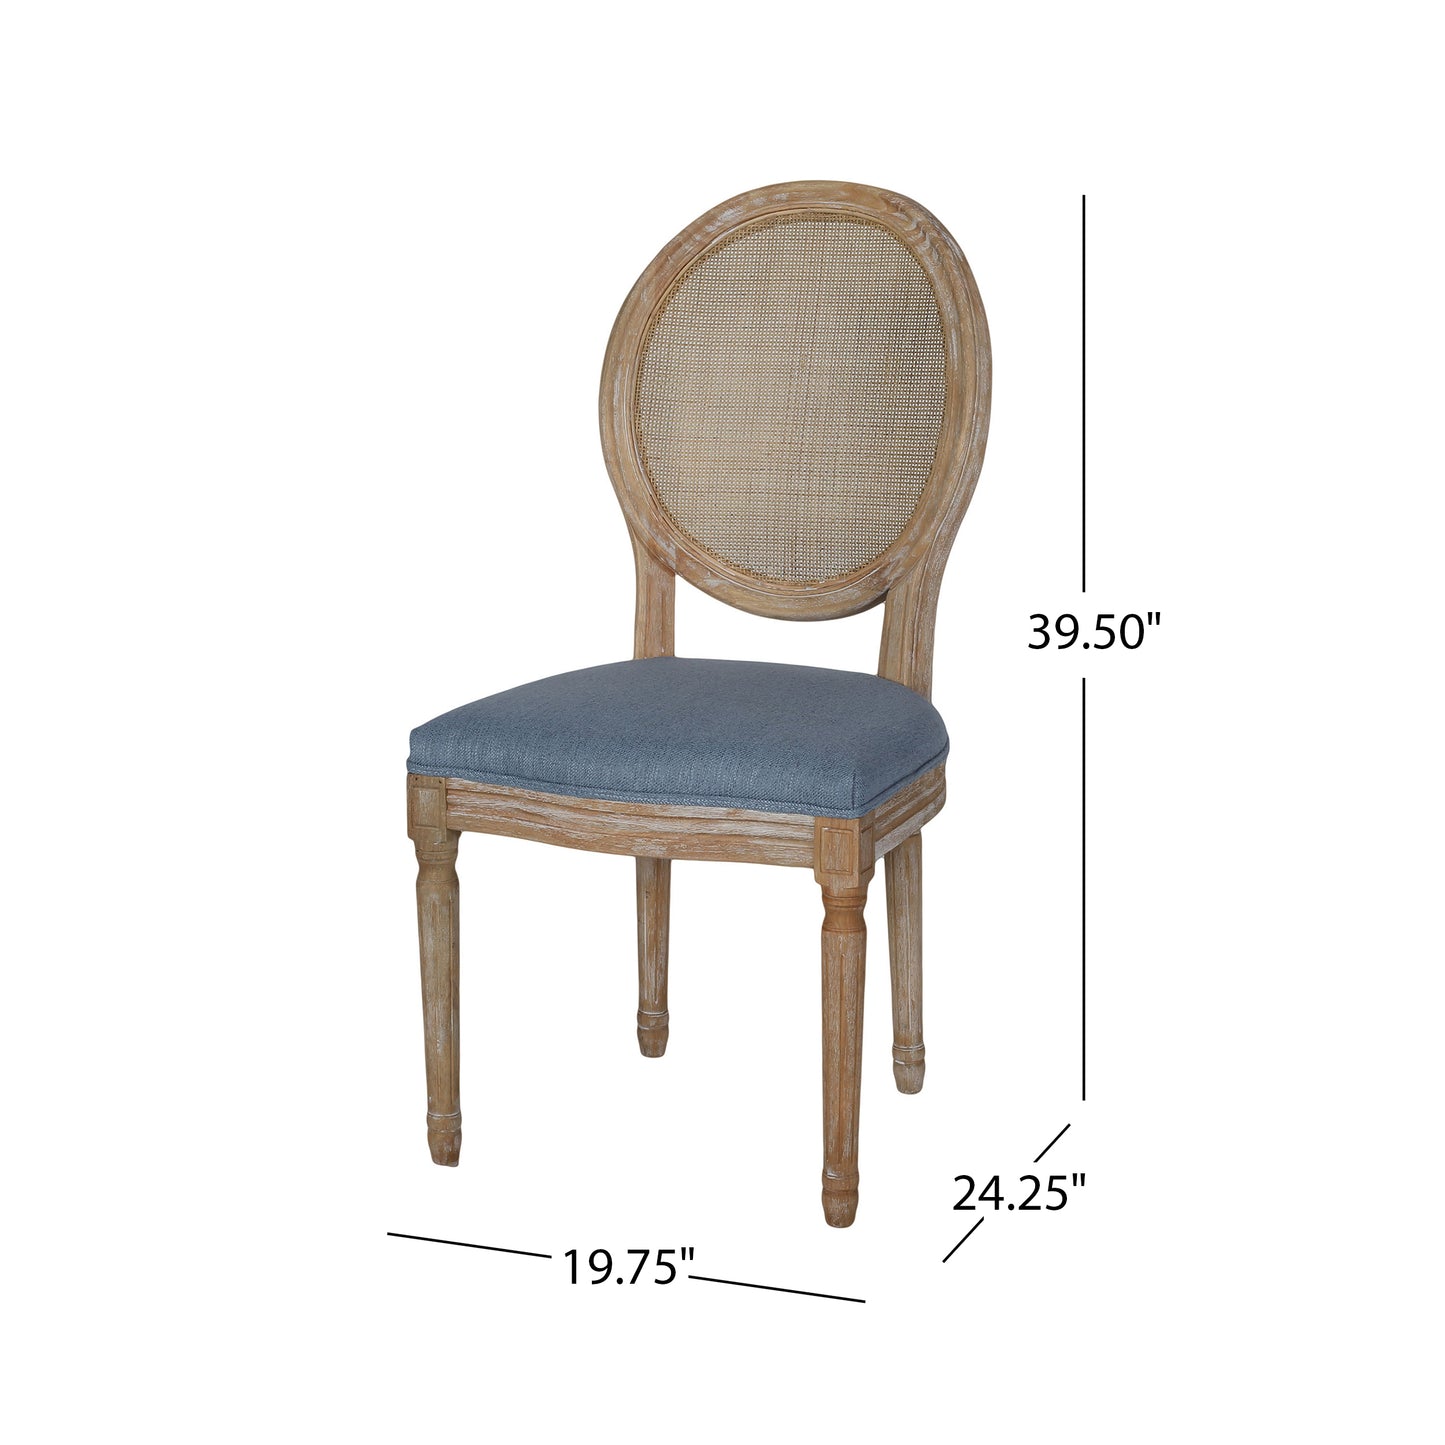 Camilo Oval Cane Back French Style Dining Chair (Set of 2)